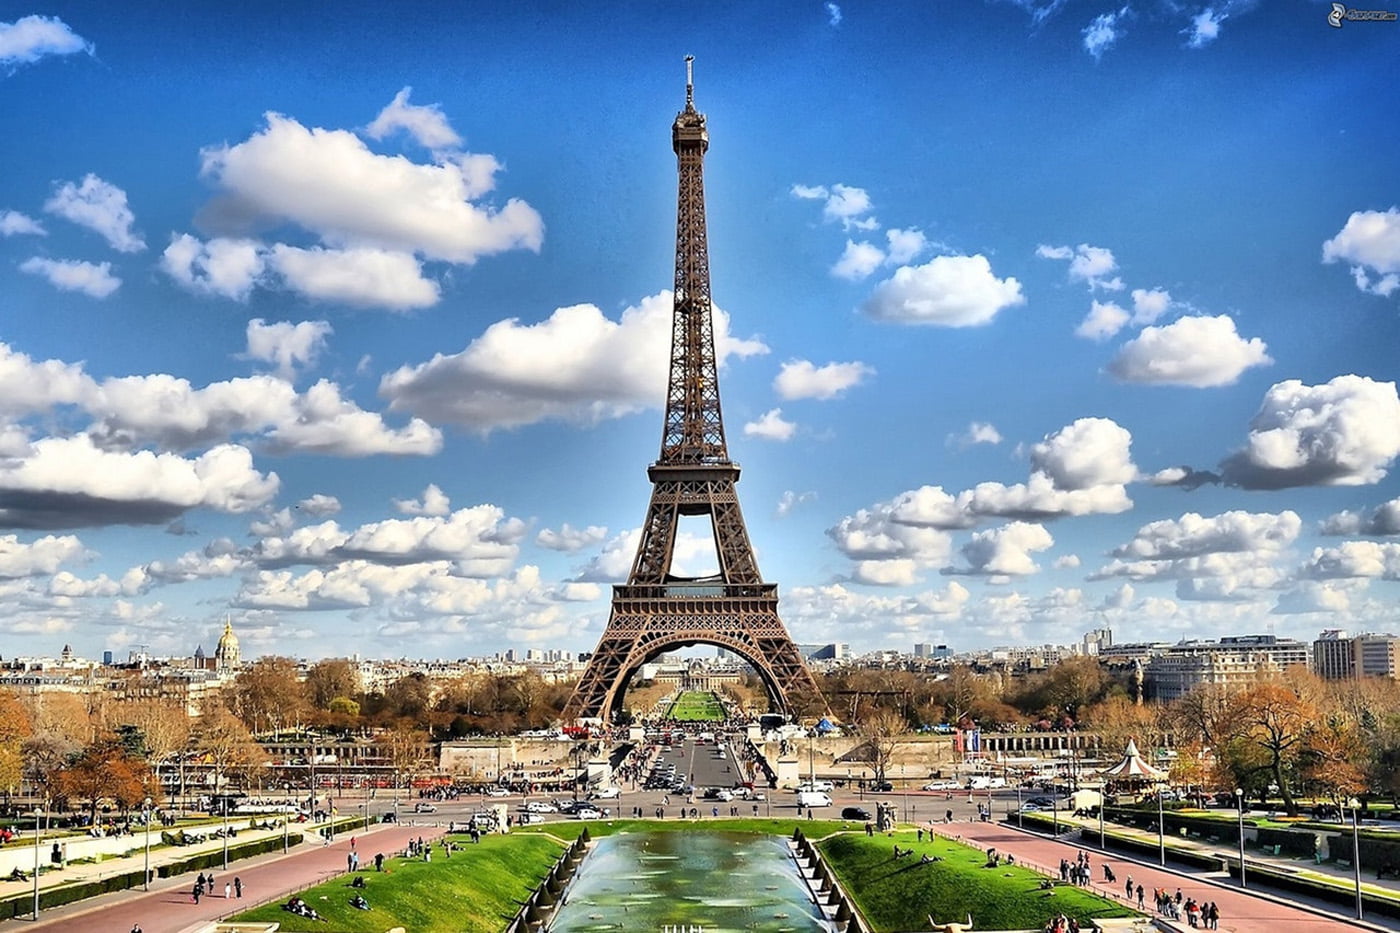 Did You Know That There's An Apartment Hidden Inside the Eiffel Tower?